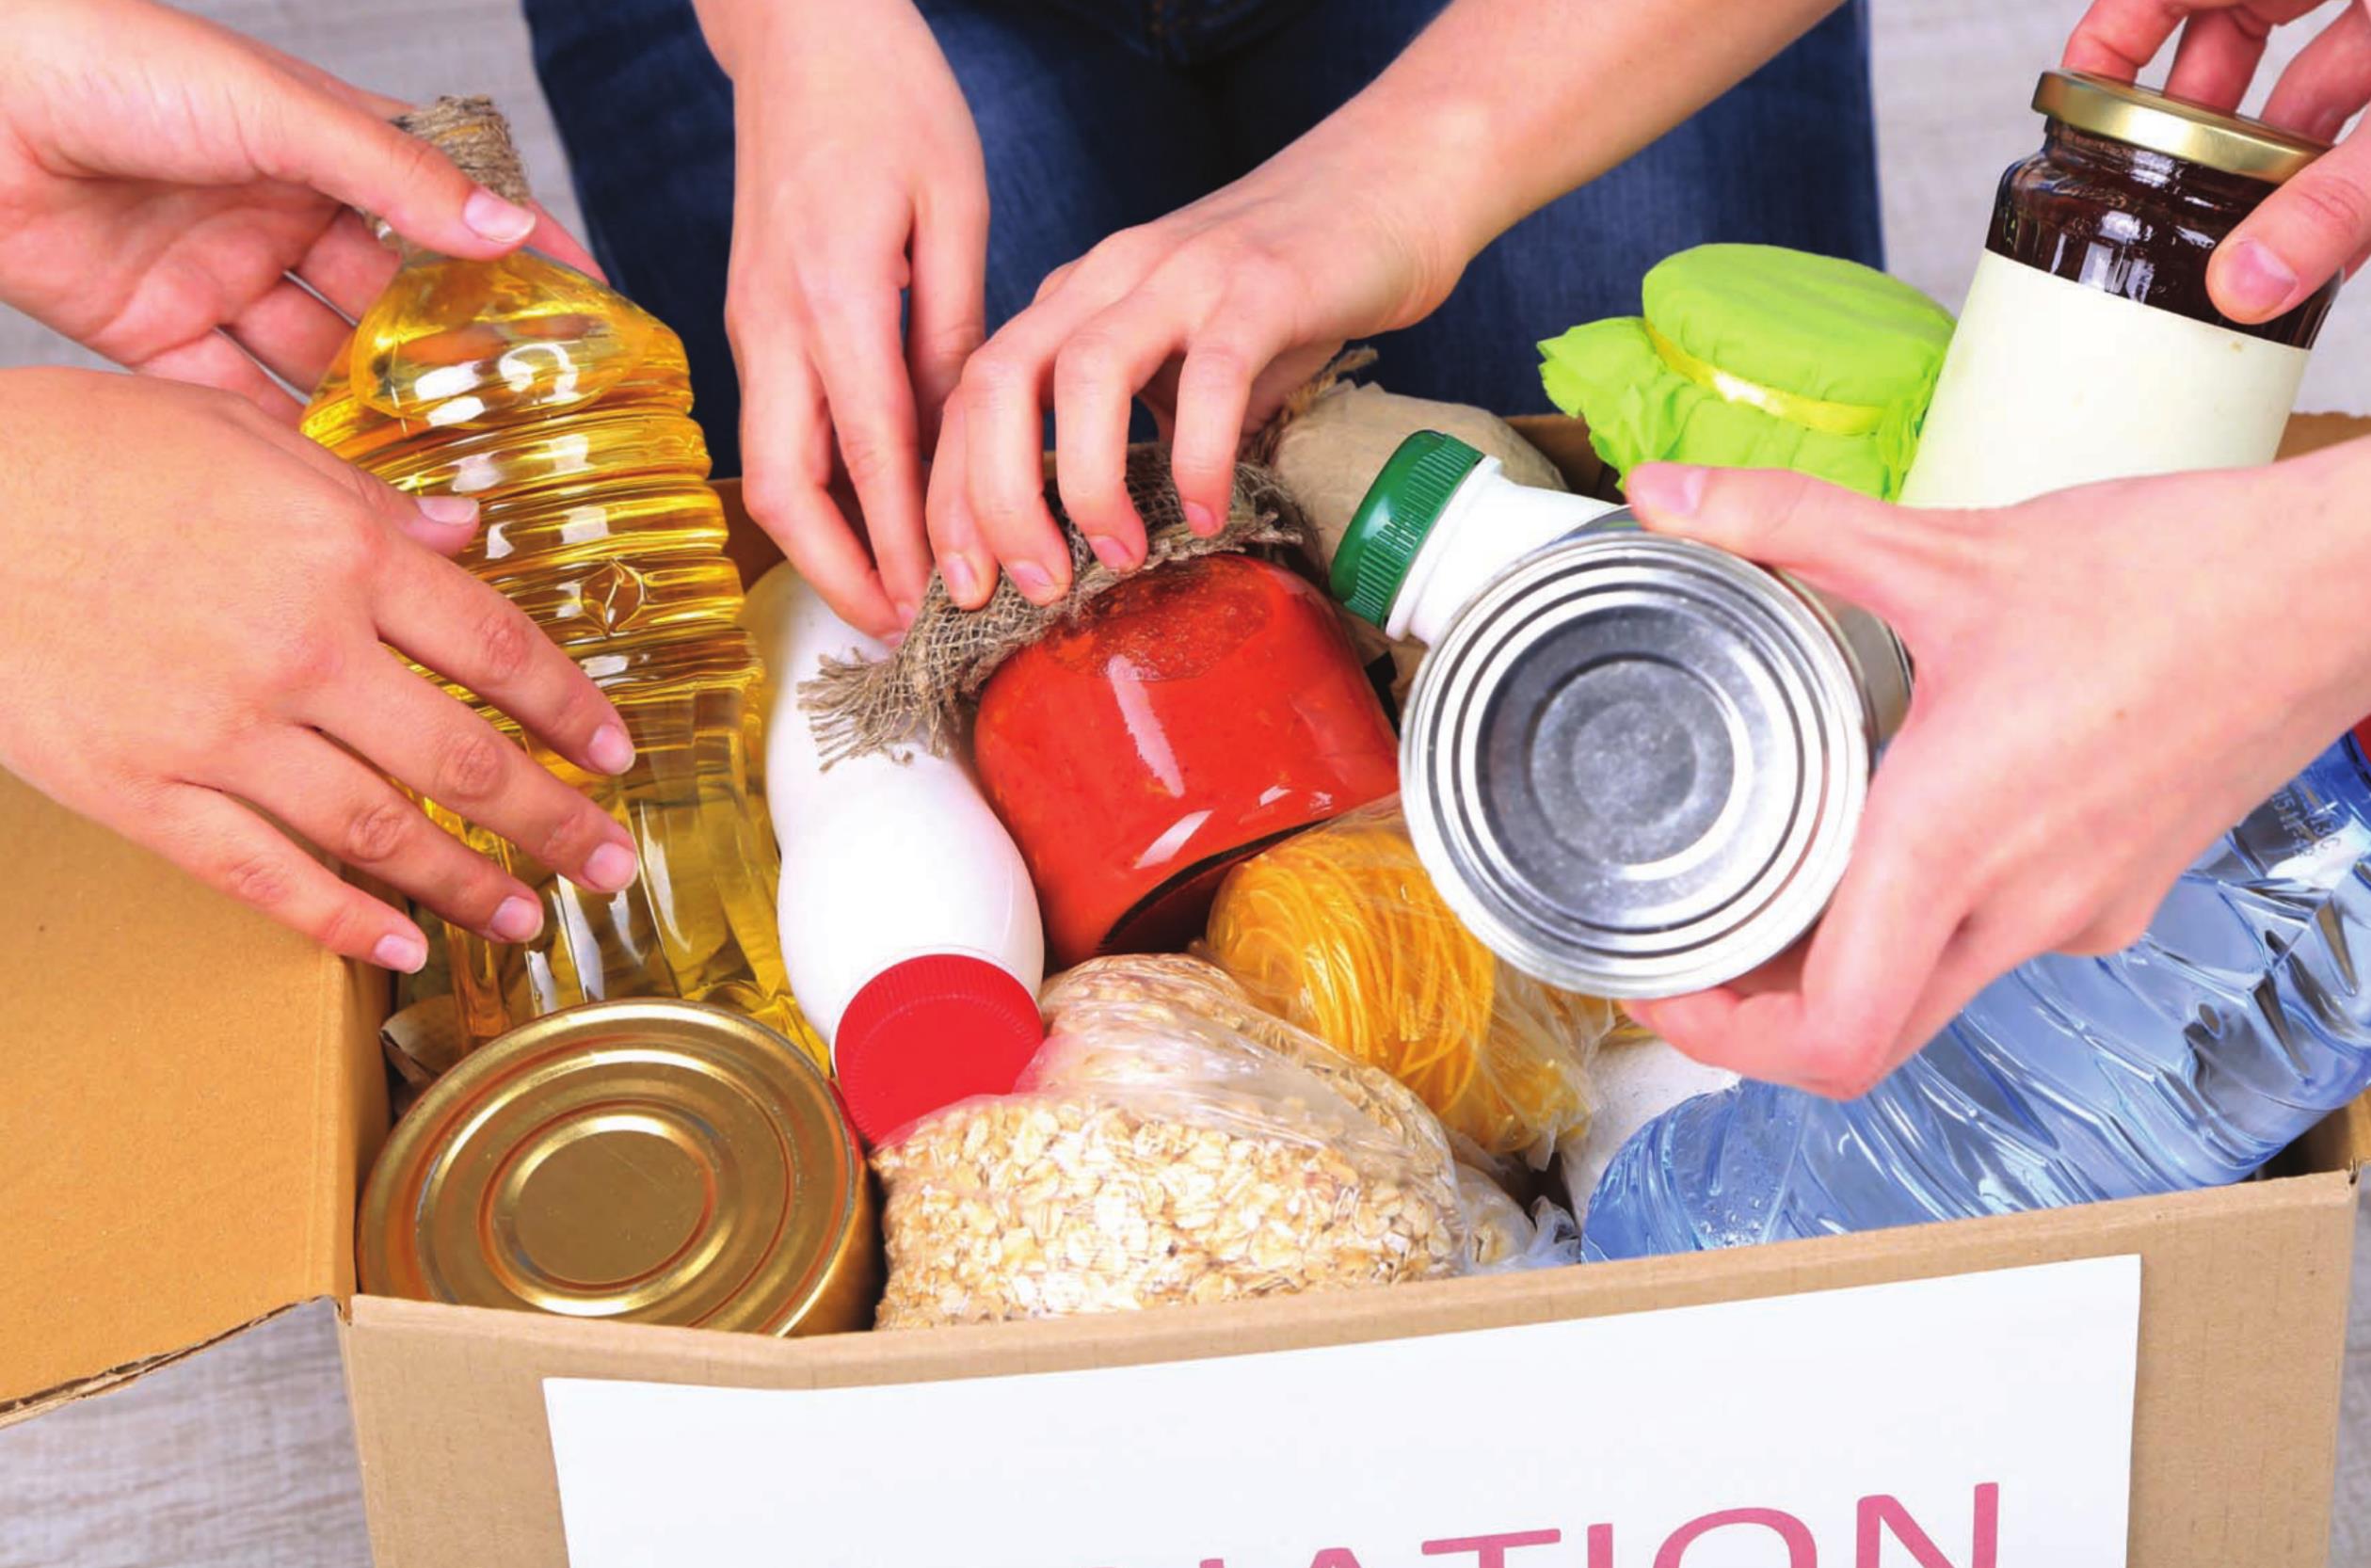 Food banks need more than nonperishable, healthy food donations to help their communities through the holidays and into 2022. They also need volunteers. Provided